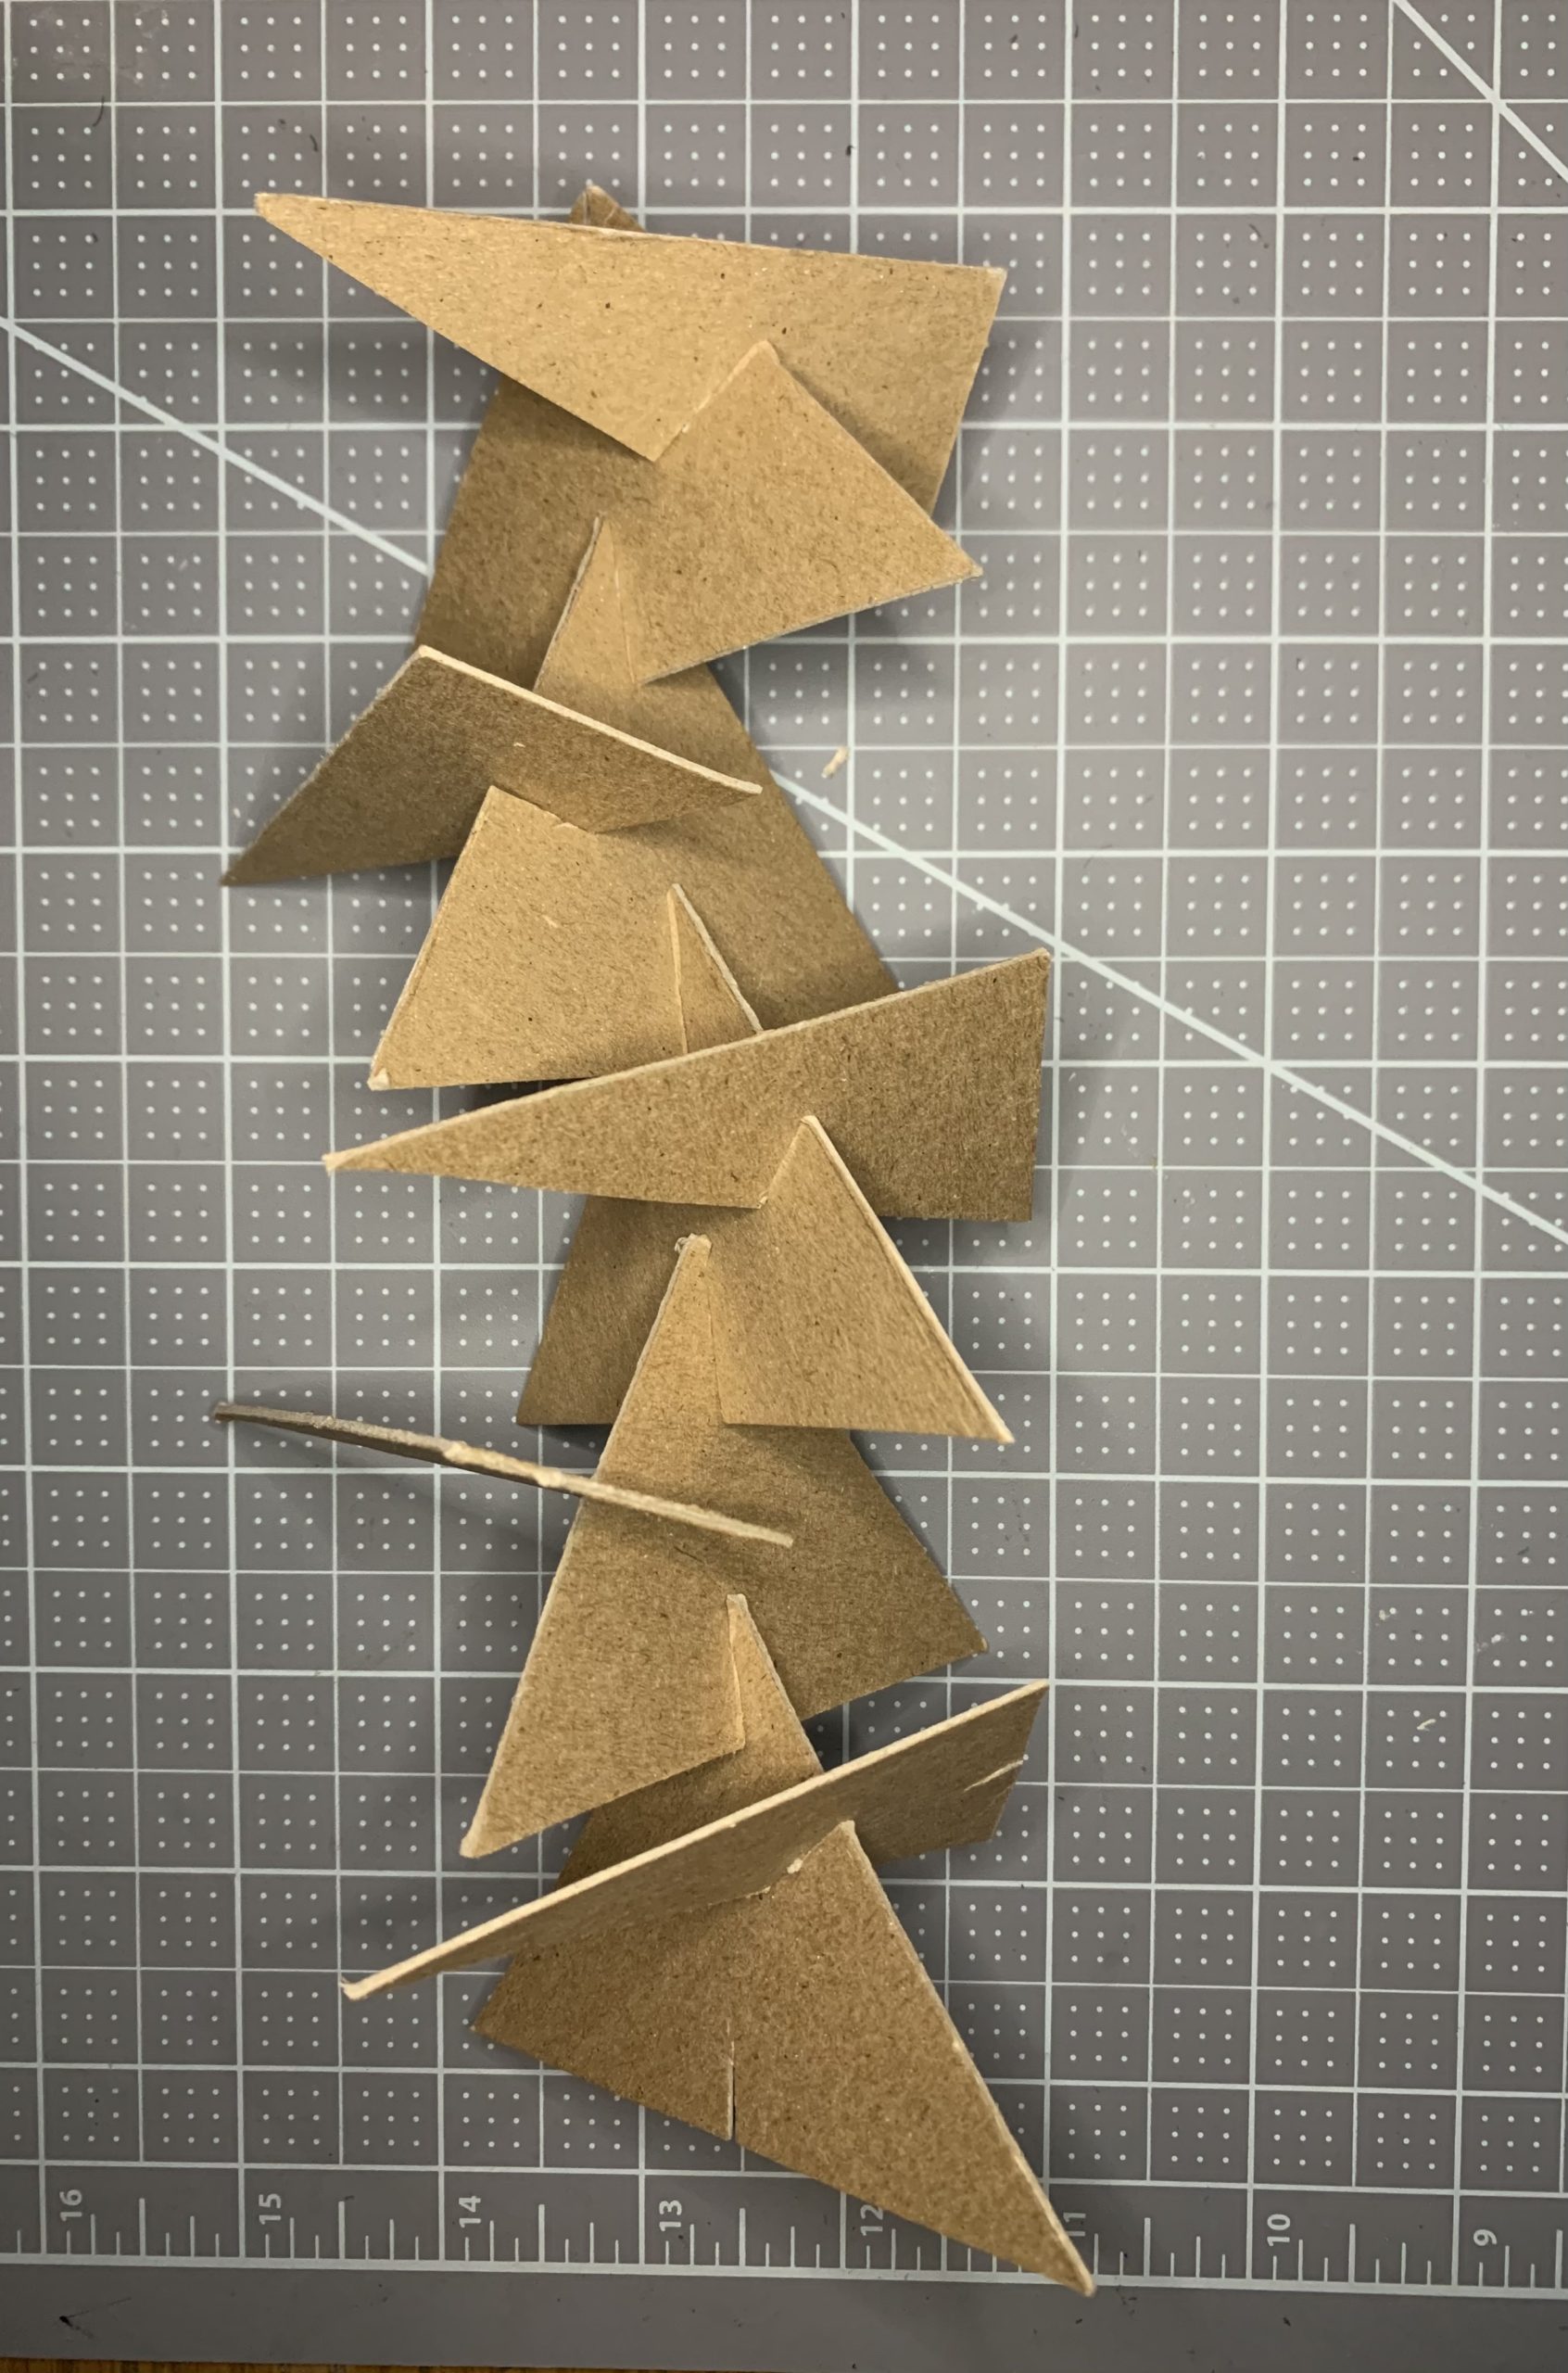 Revised Chipboard Composition